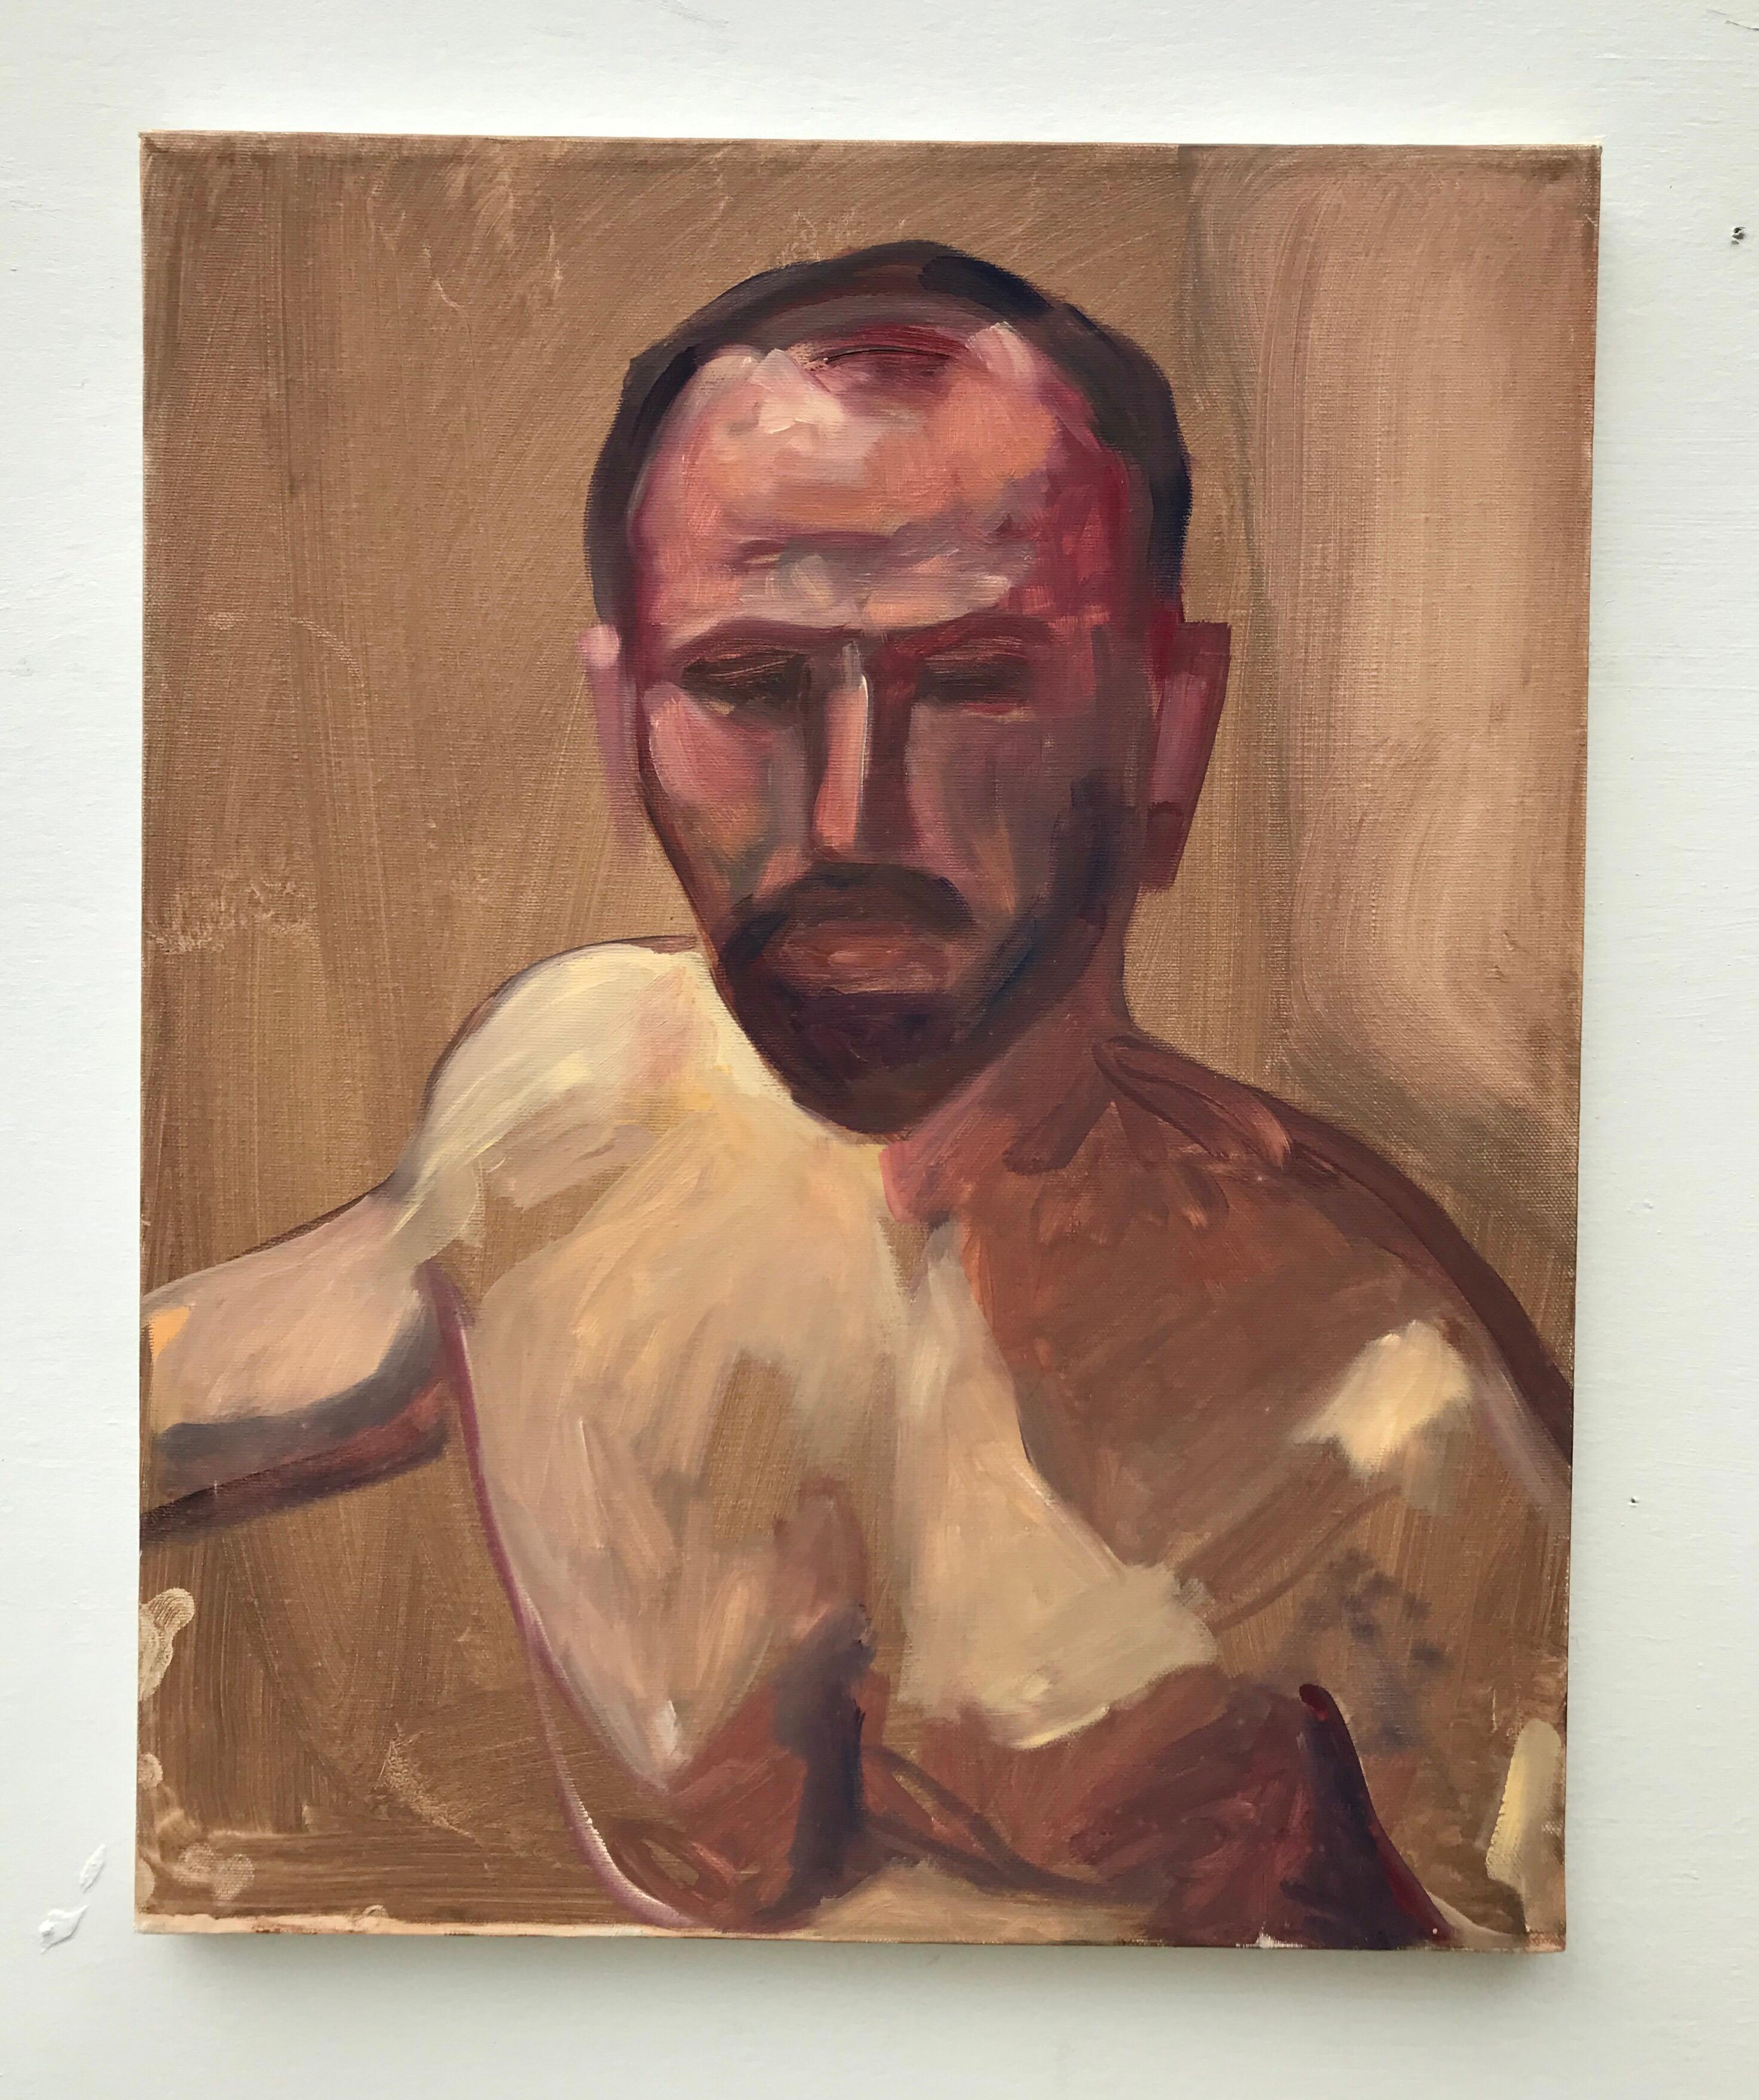 A figural portrait painting of a bearded male. The work is unsigned and part of a 22 painting collection by the unknown student artist. We love the fresh and exuberant light heartedness of the acrylic on canvas.